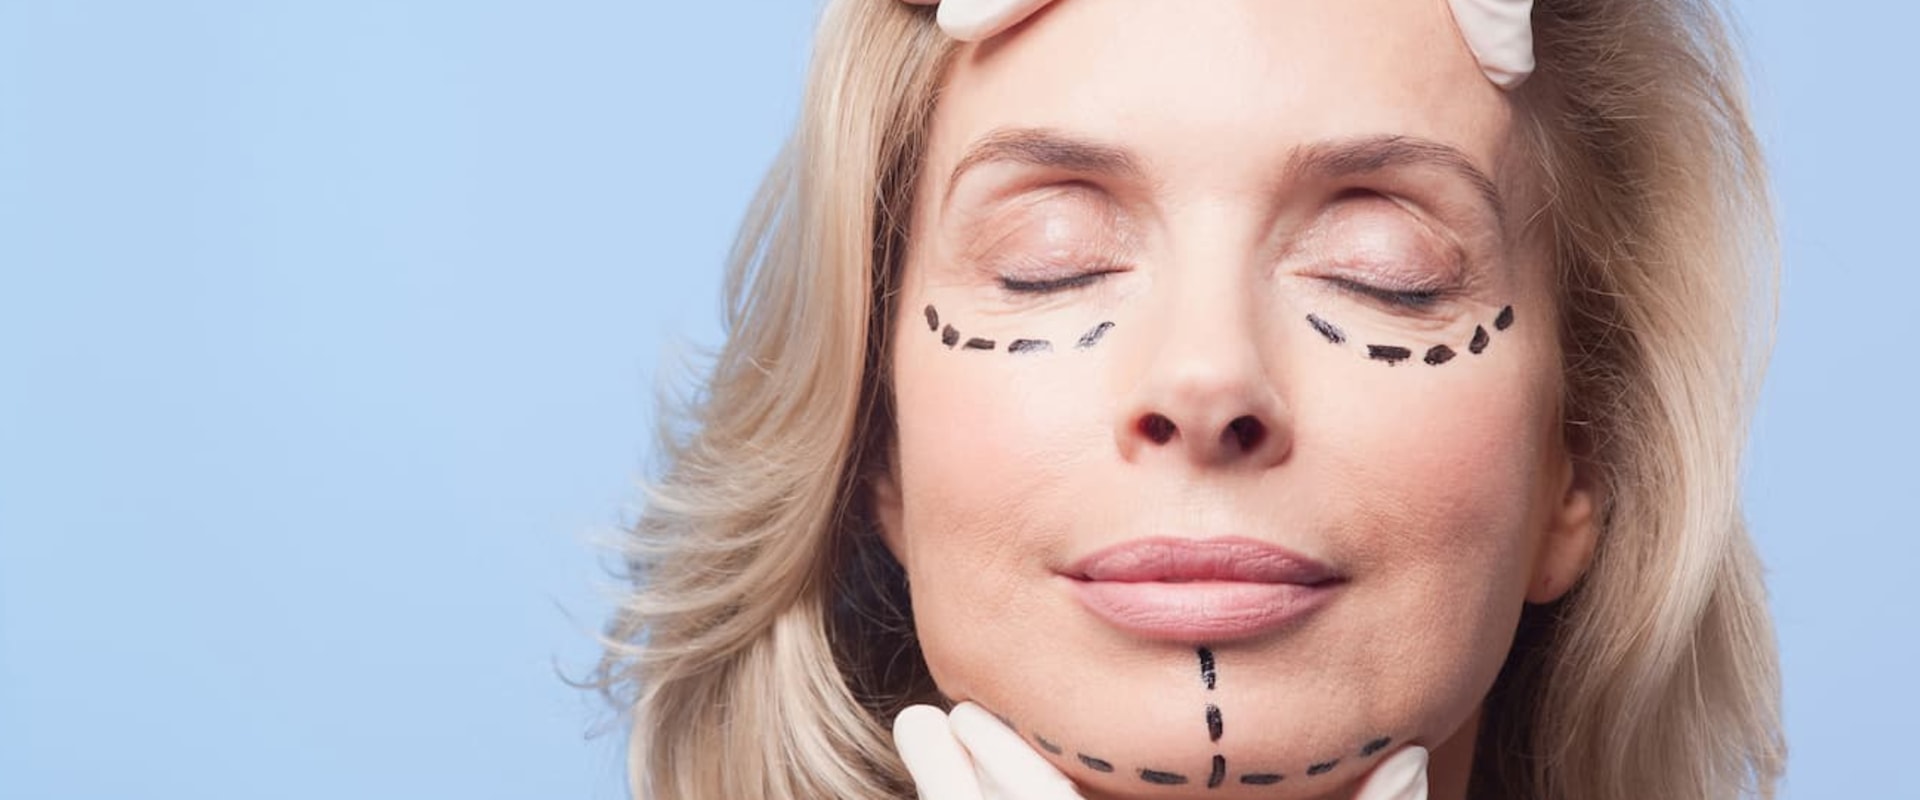 Can You Deduct the Cost of Cosmetic Surgery on Your Taxes?